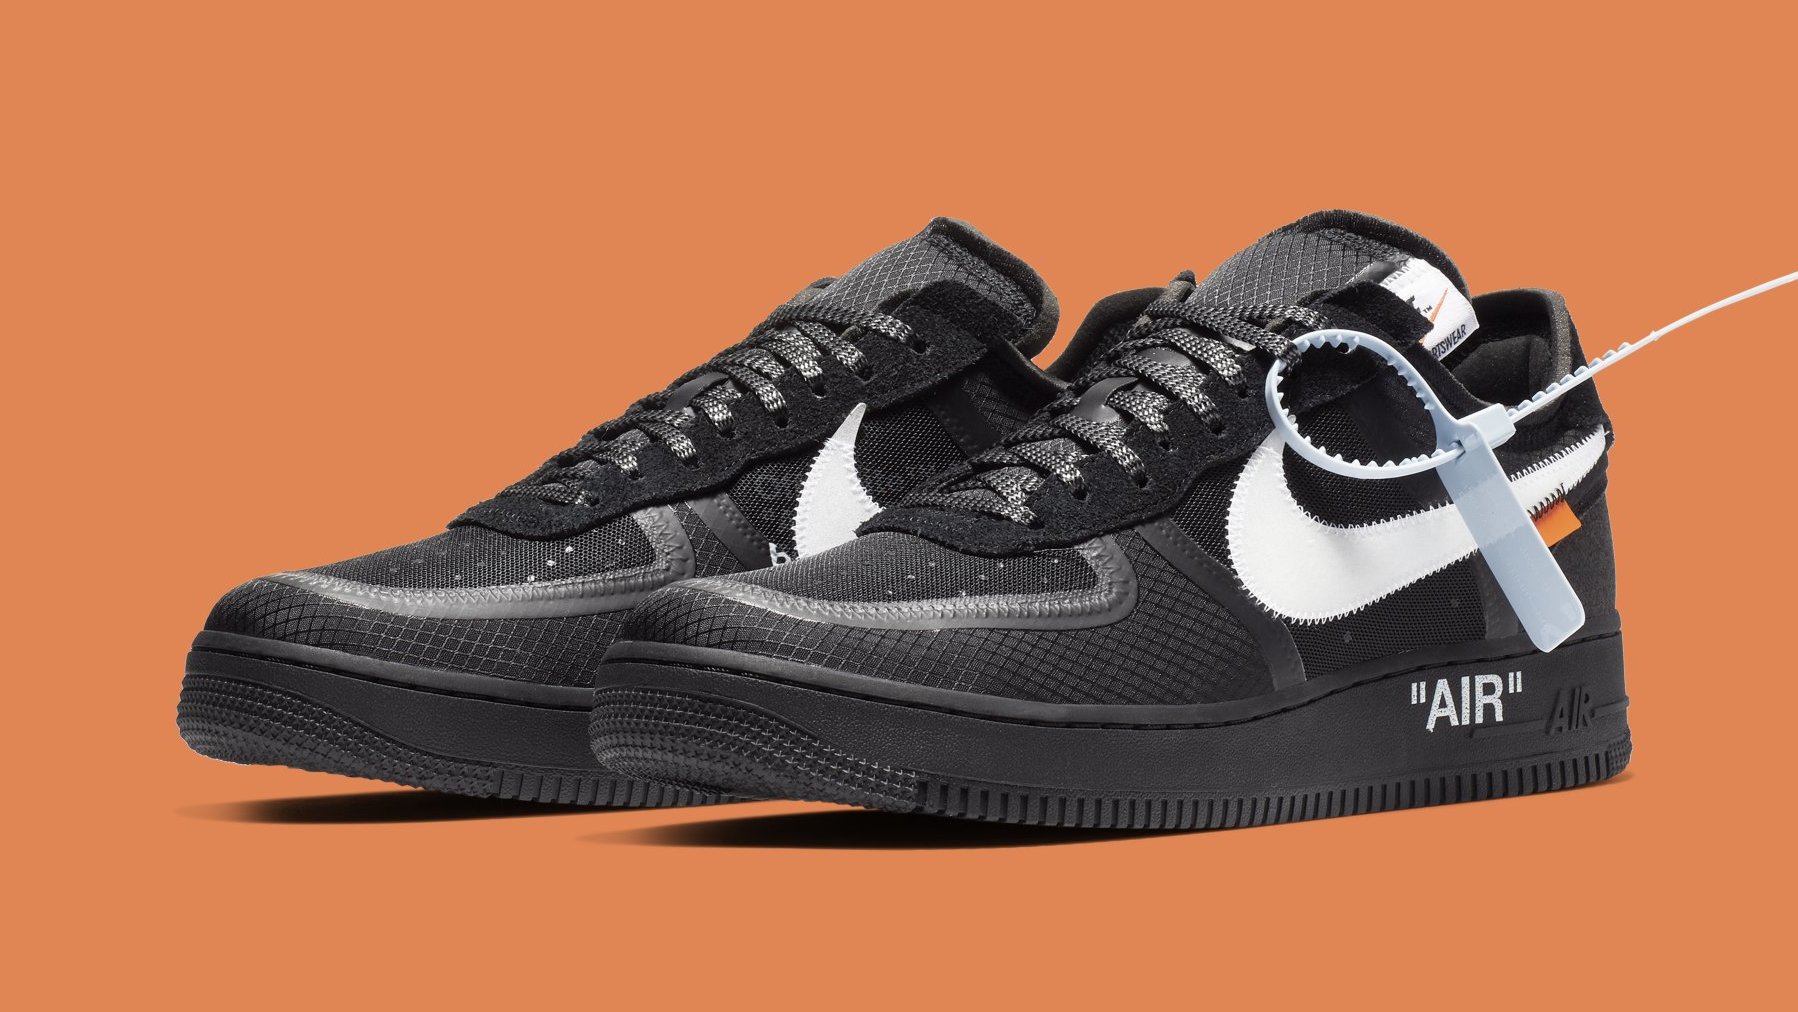 Ordinere Hollywood meddelelse Off-White x Nike Air Force 1 Low 'Black/White' AO4606-001 Release Date |  Sole Collector